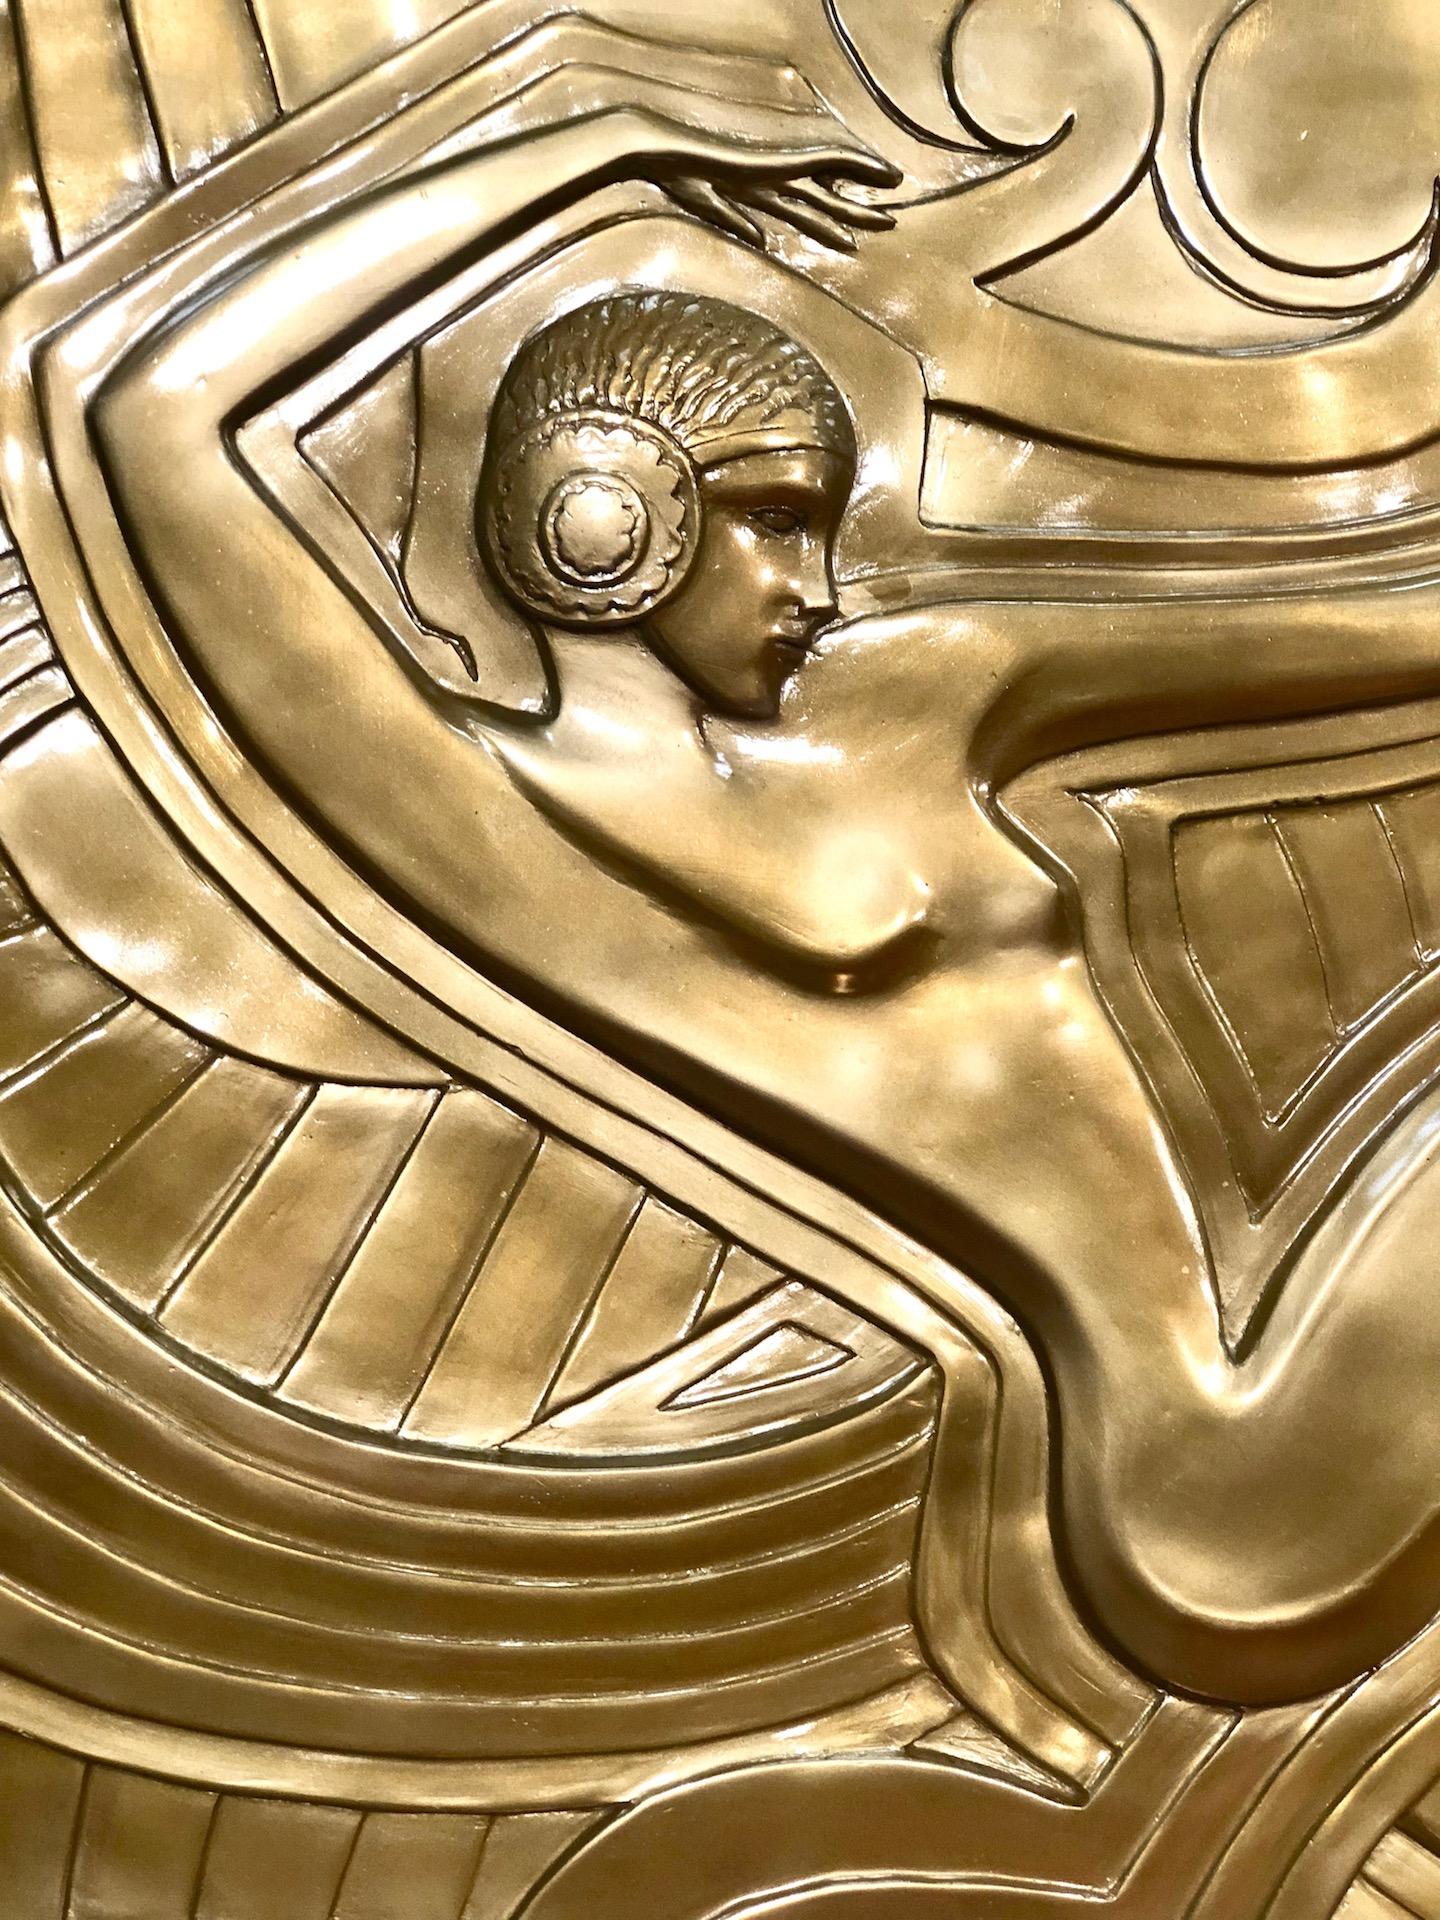 Golden wall plaque made after the model that decorates the facade of the revue theater “Folies Bergère” in Paris. This meter-high relief dates from 1926, by the French architect and designer “Maurice Picaud”, called “Pico”. The depicted dancer could